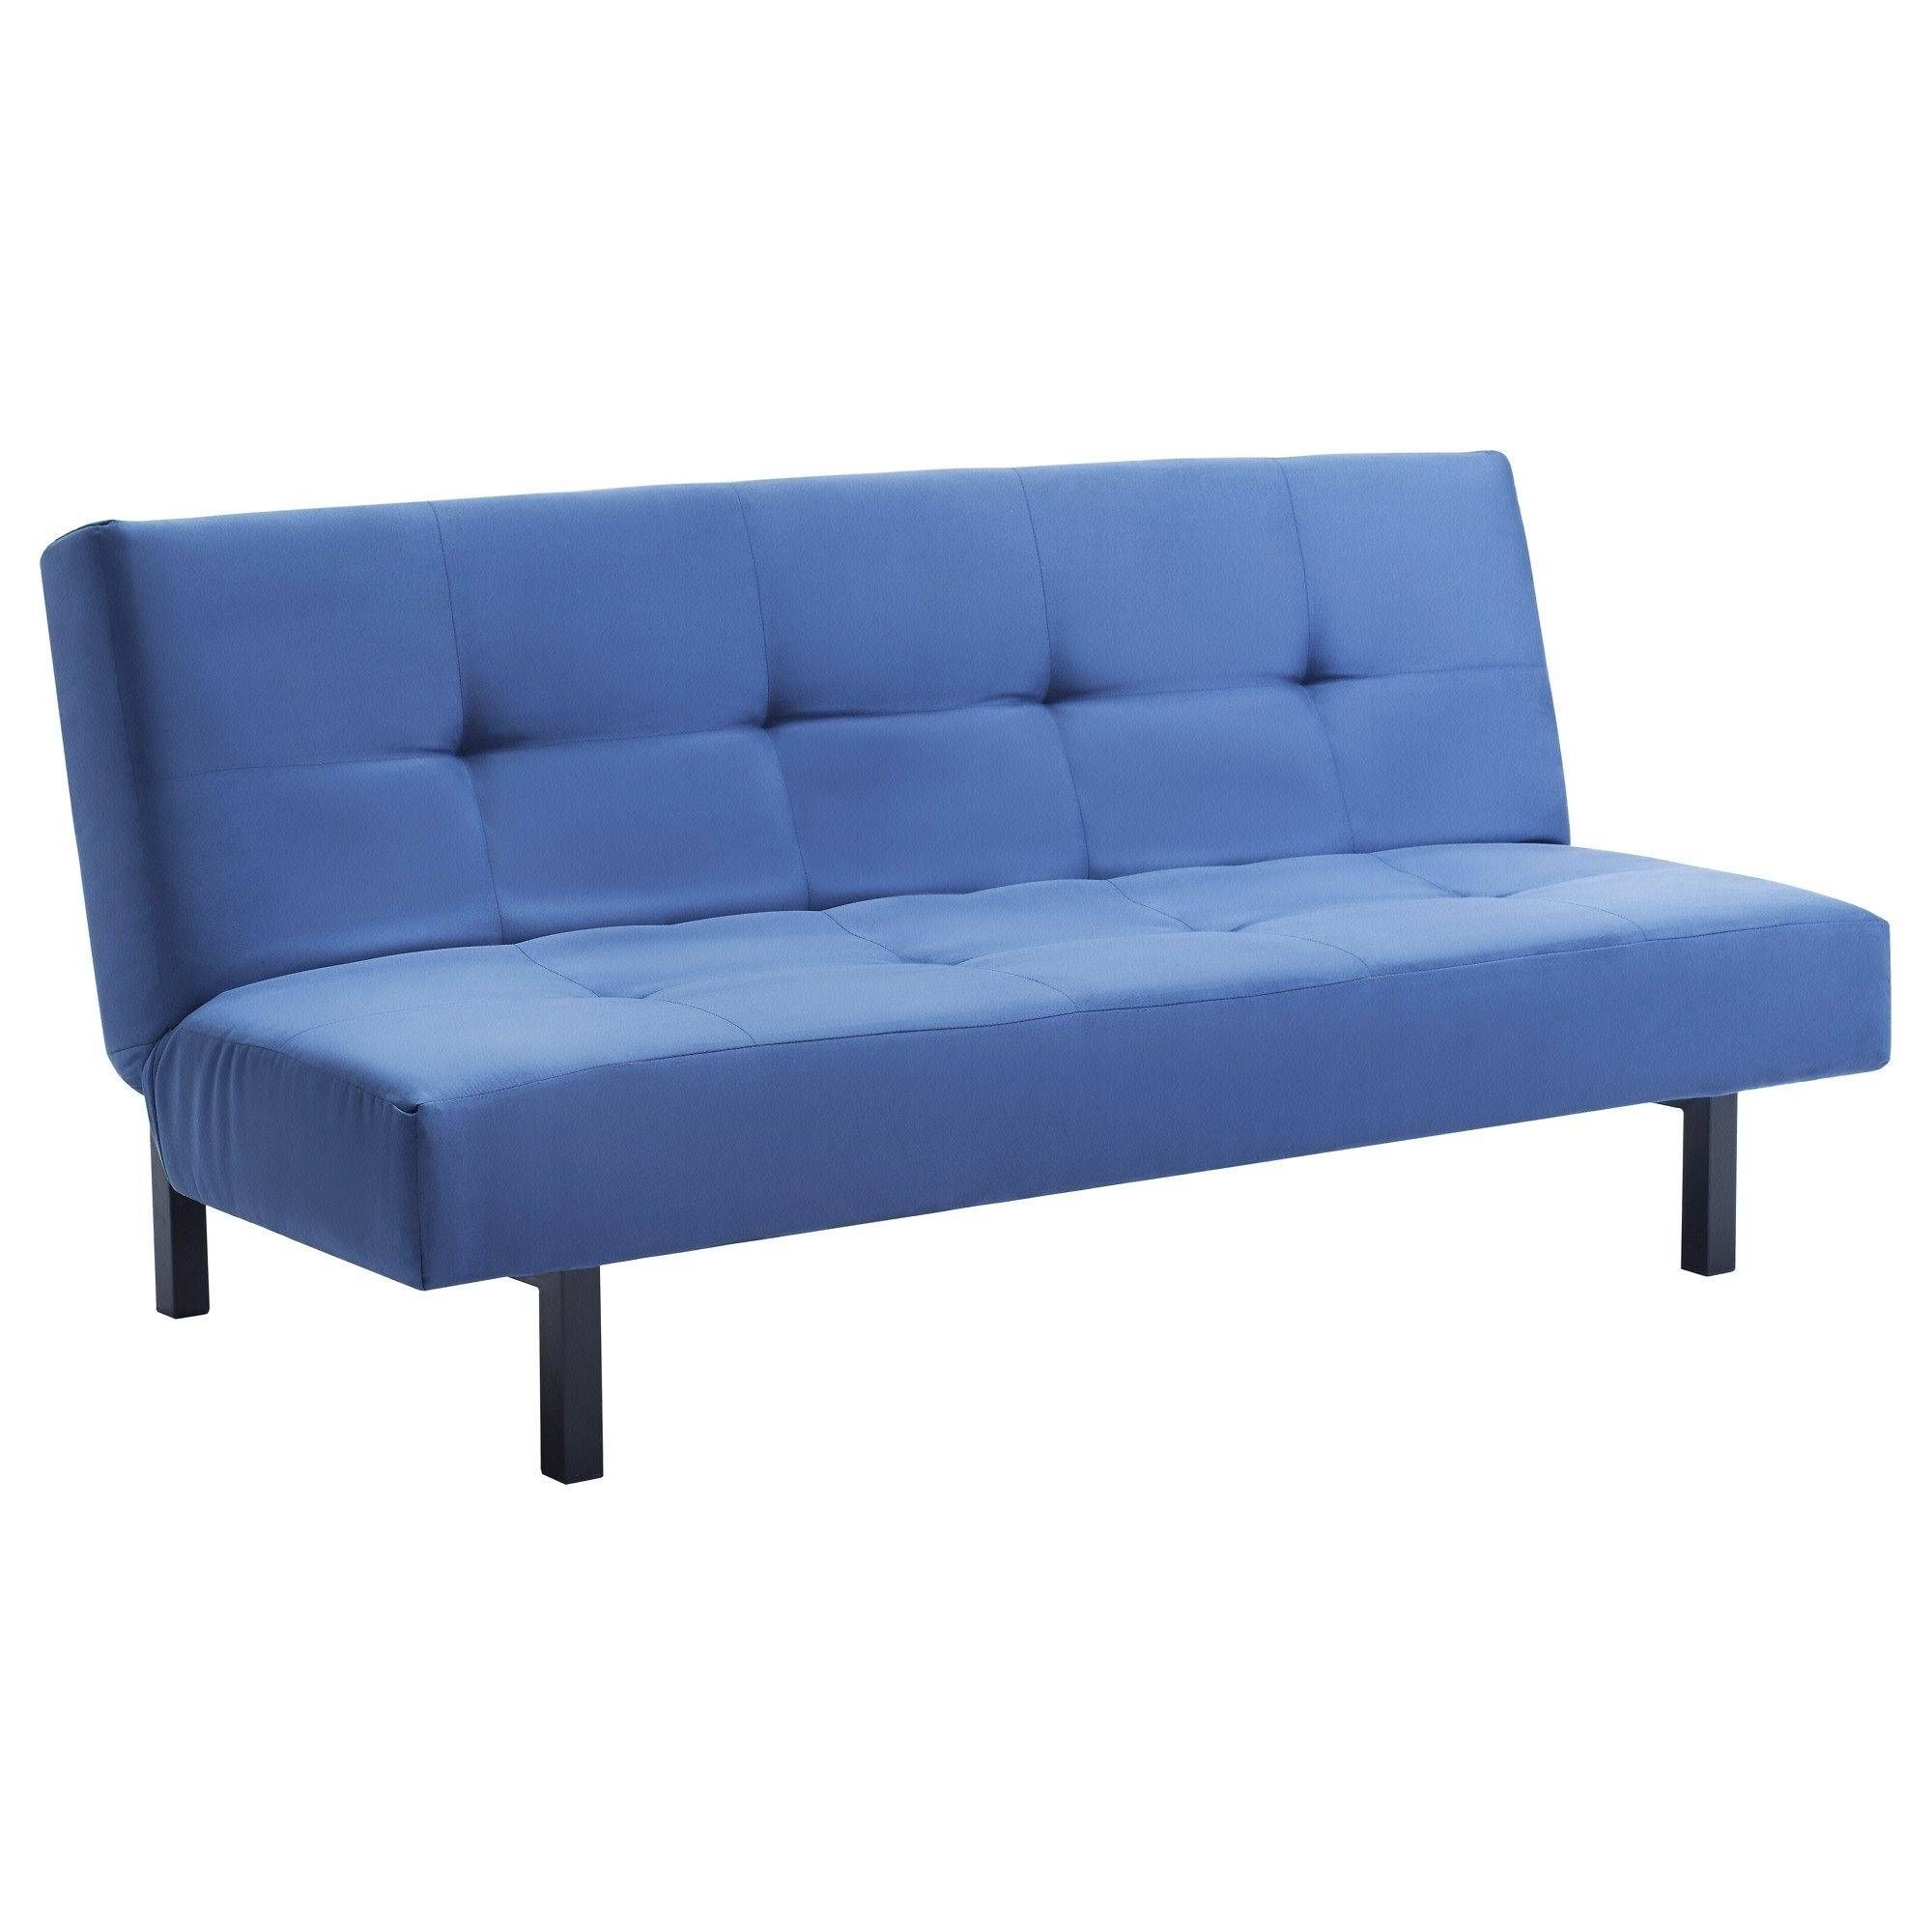 Sofas: Sleeper Sofas Ikea That Great For A Quick Snooze Or Night Throughout Sleeper Sofas Ikea (View 7 of 25)